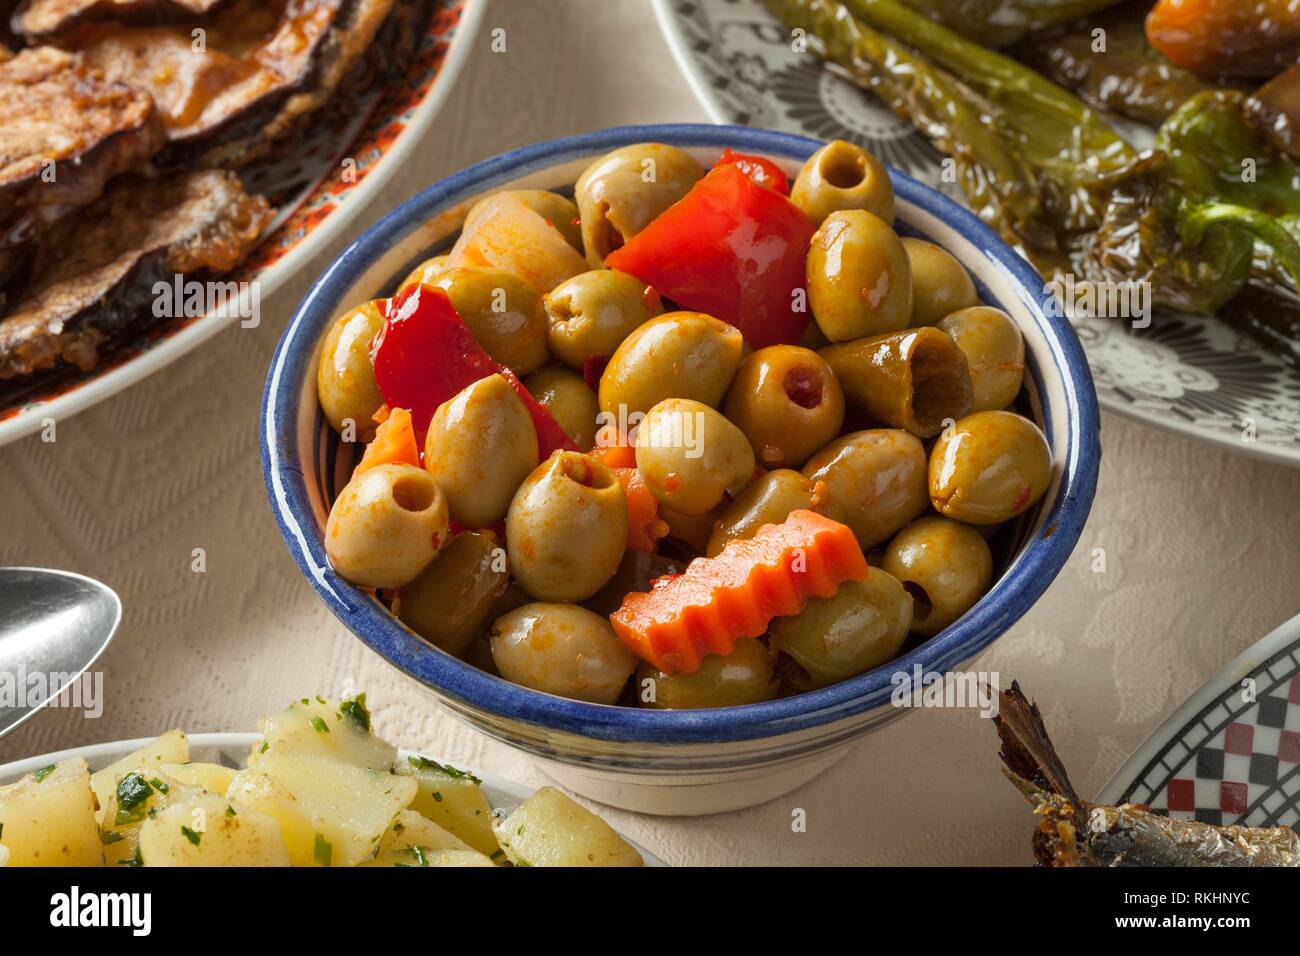 Bowl with traditional Moroccan pickled olives as a side dish close up. Stock Photo